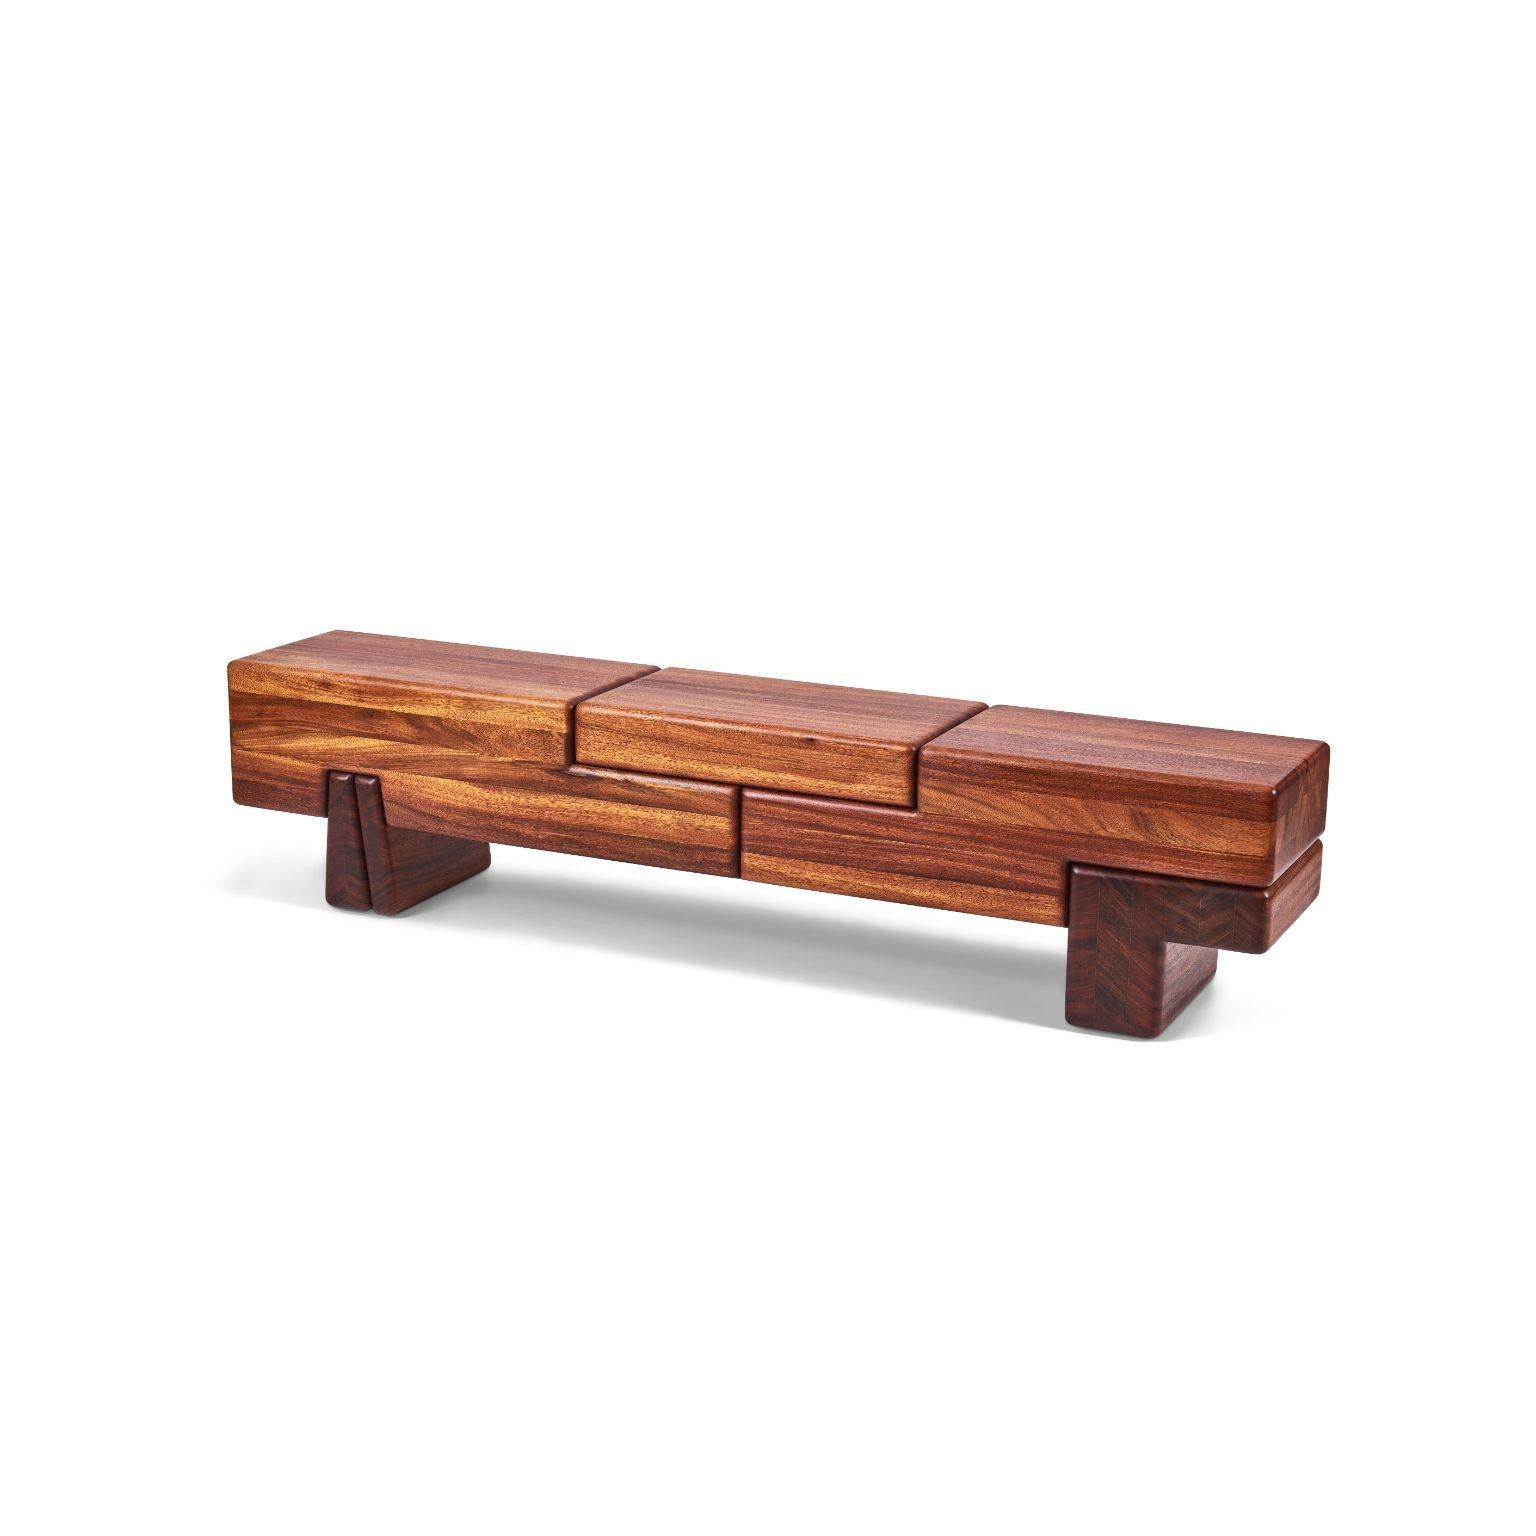 Turkish Okan D'arfique Laminated Bench by Contemporary Ecowood For Sale